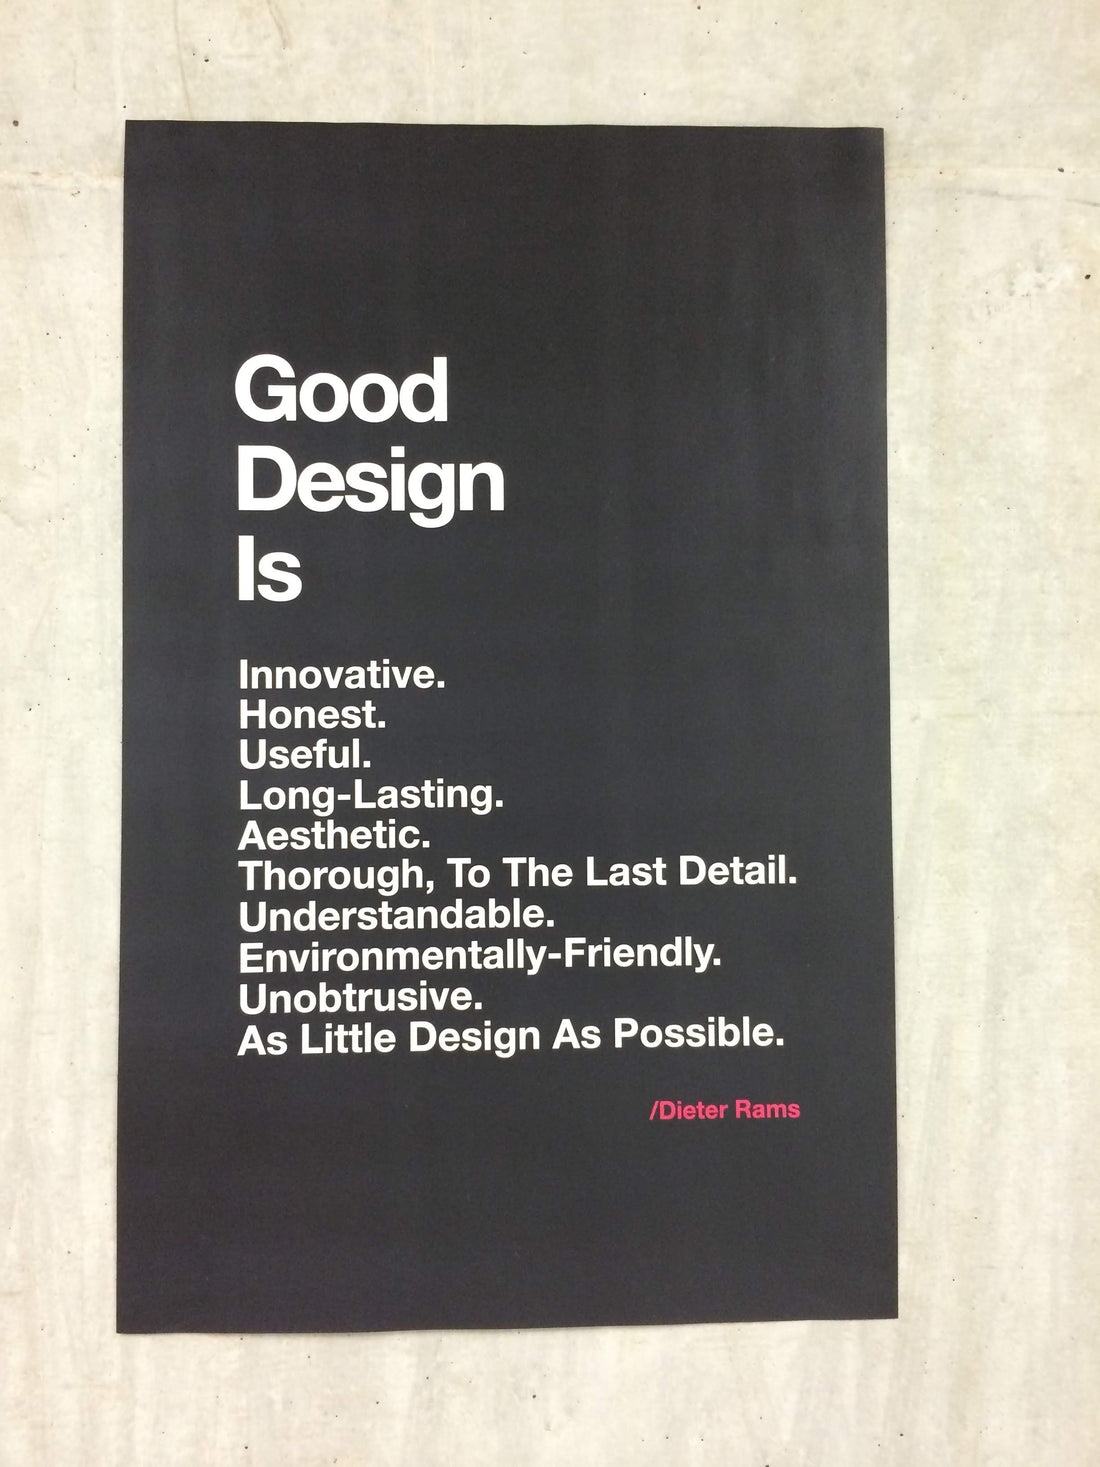 Poster with the headline Good Design Is listing adjectives attributed to Dieter Rams